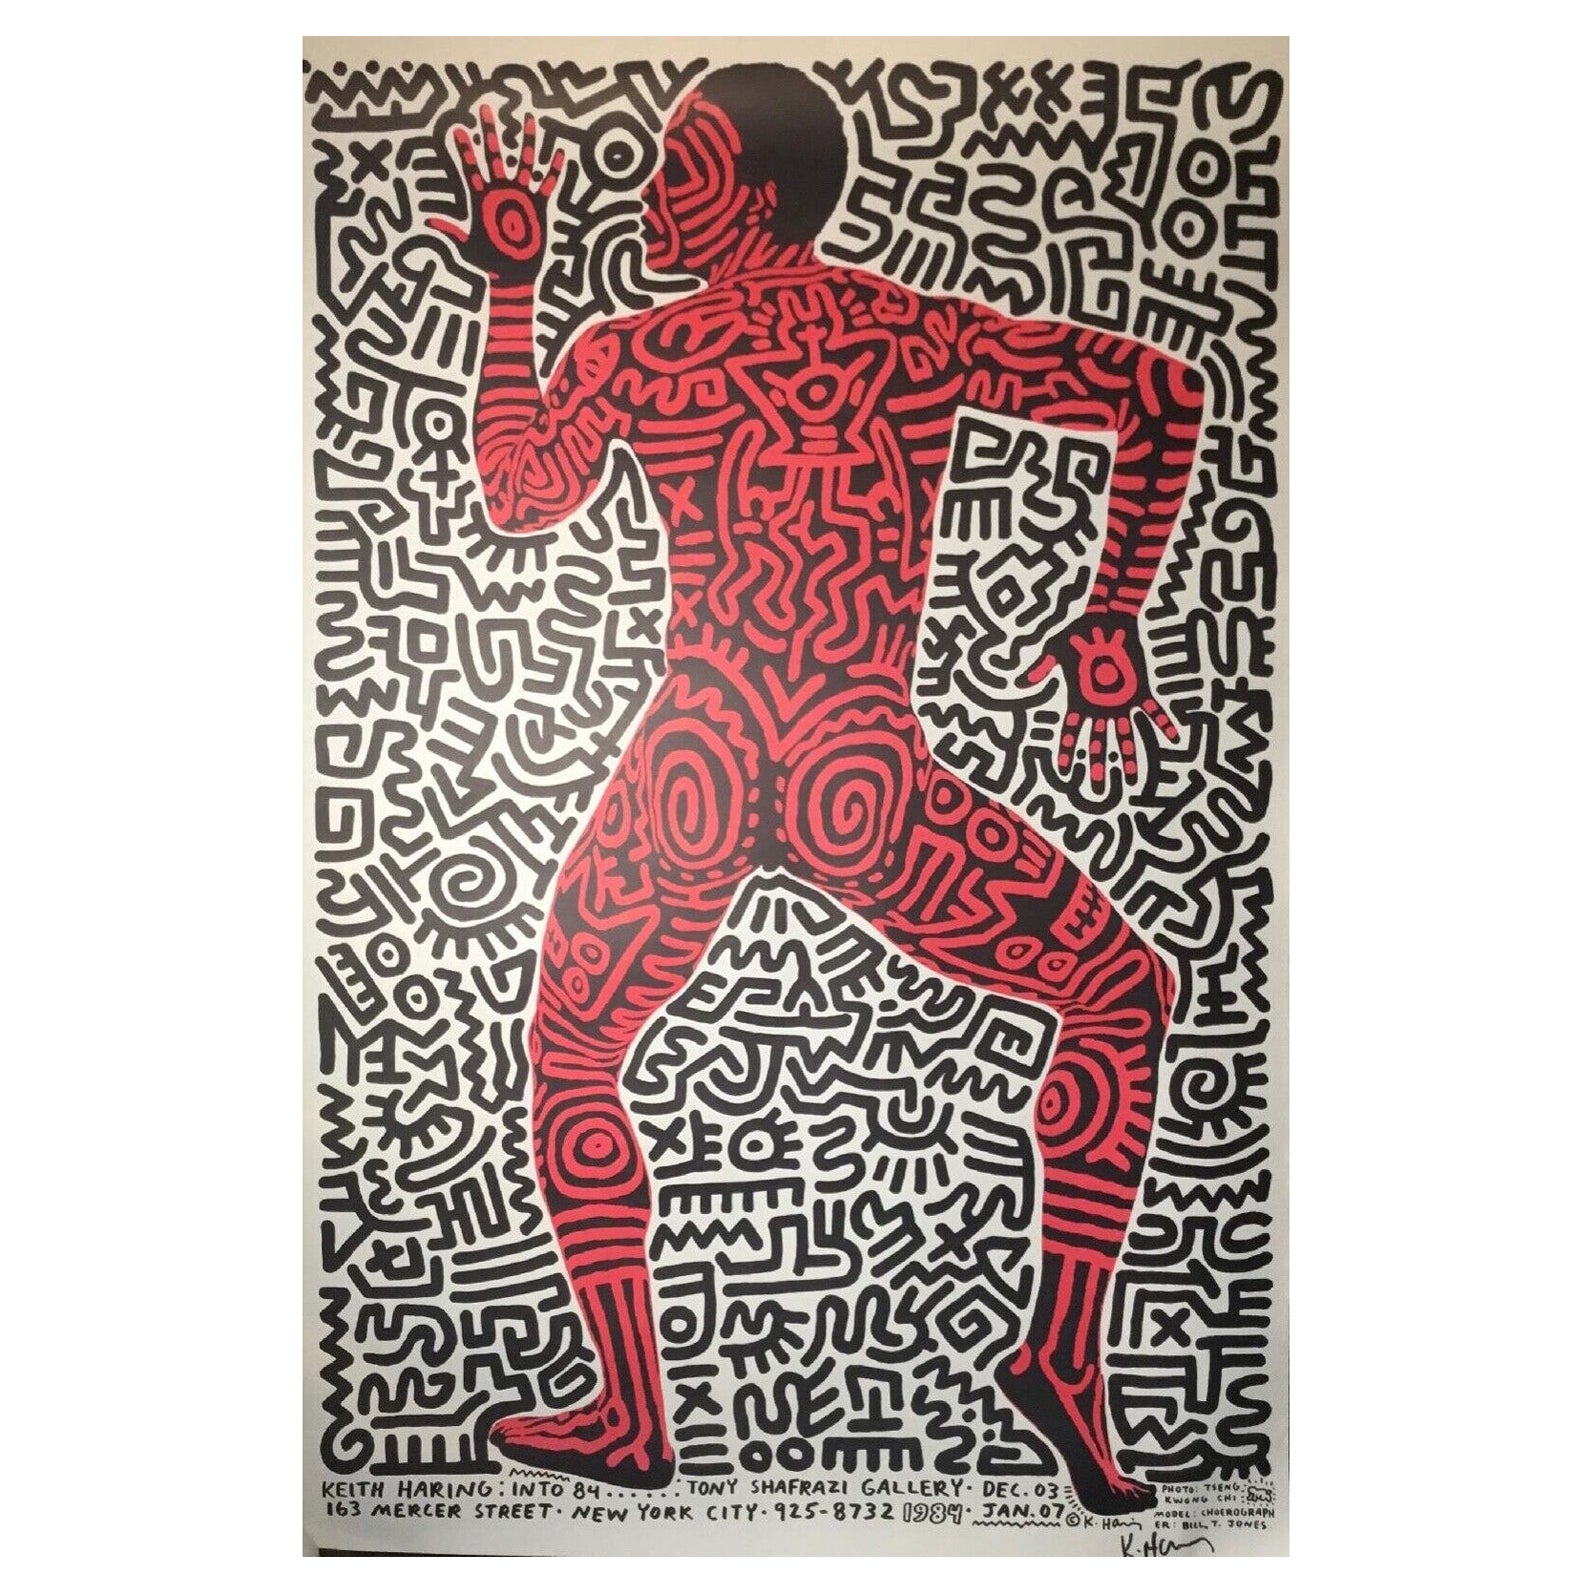 Keith Haring Signed Lithograph Tony Shafrazi Gallery Exhibition Poster Into 84 For Sale